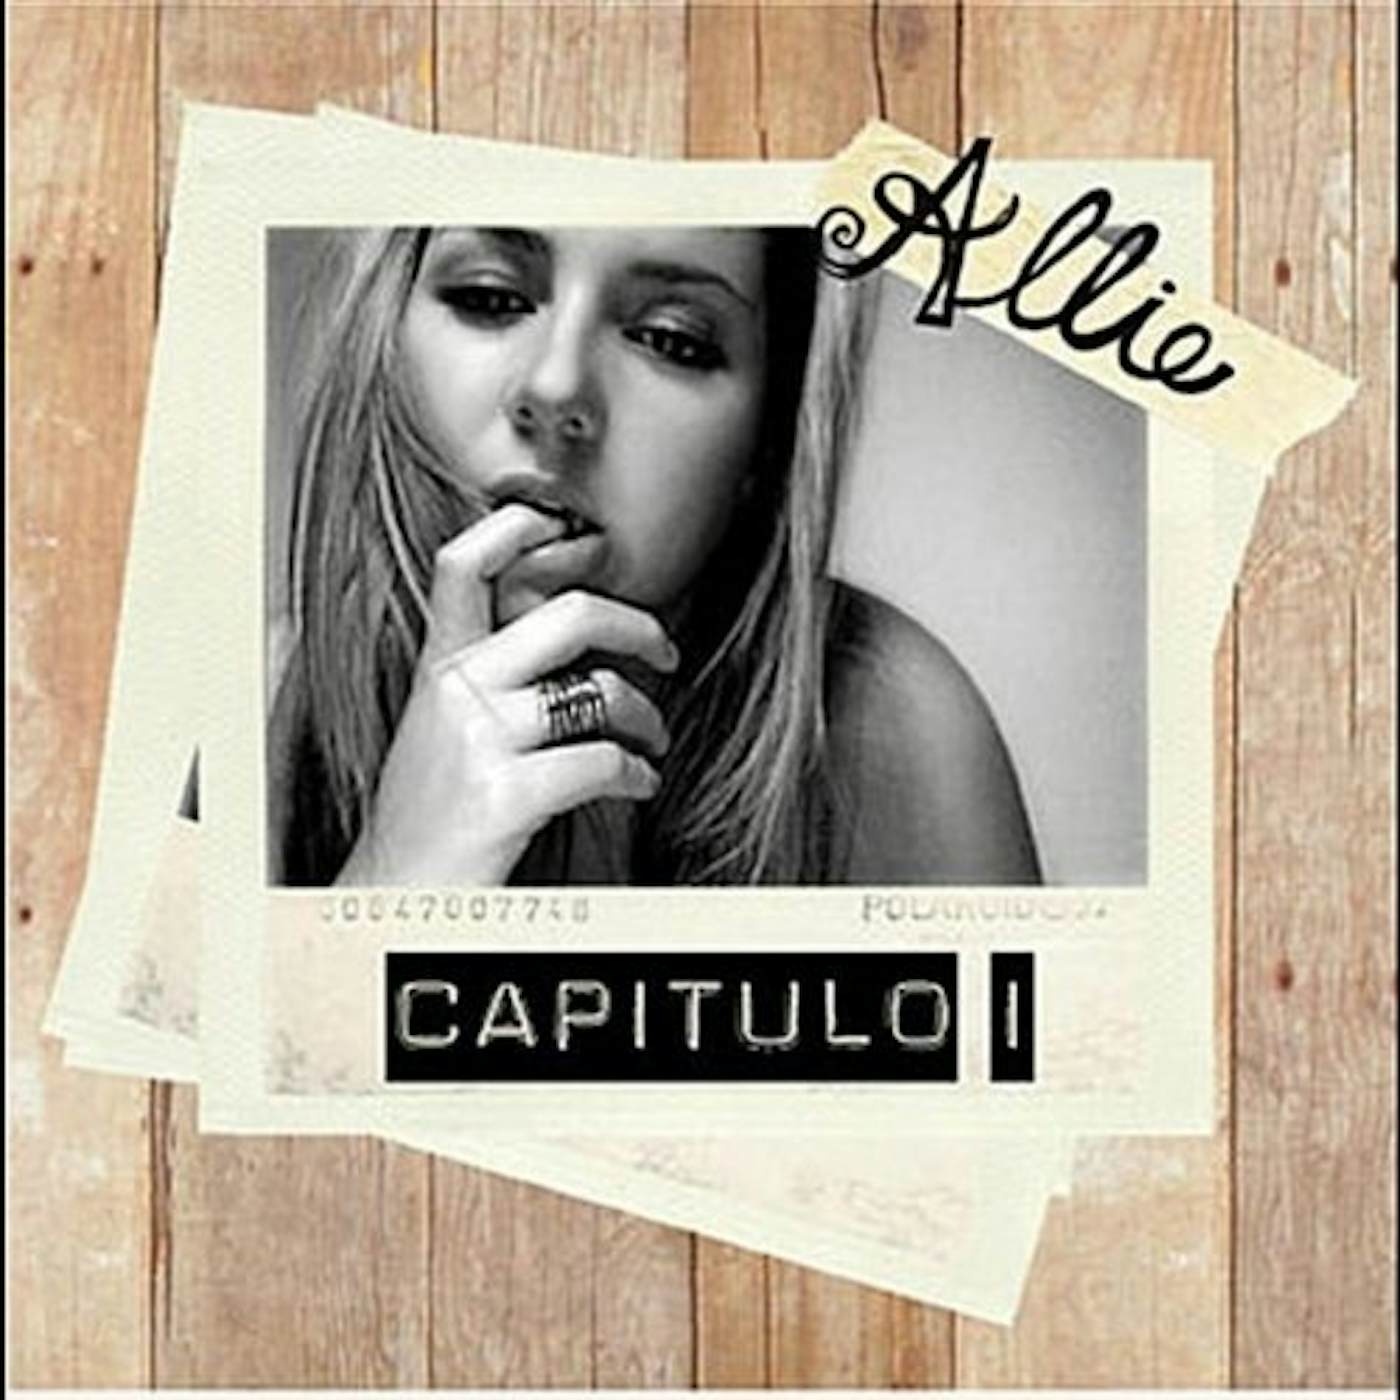 Allie CAPITULO 1 CD